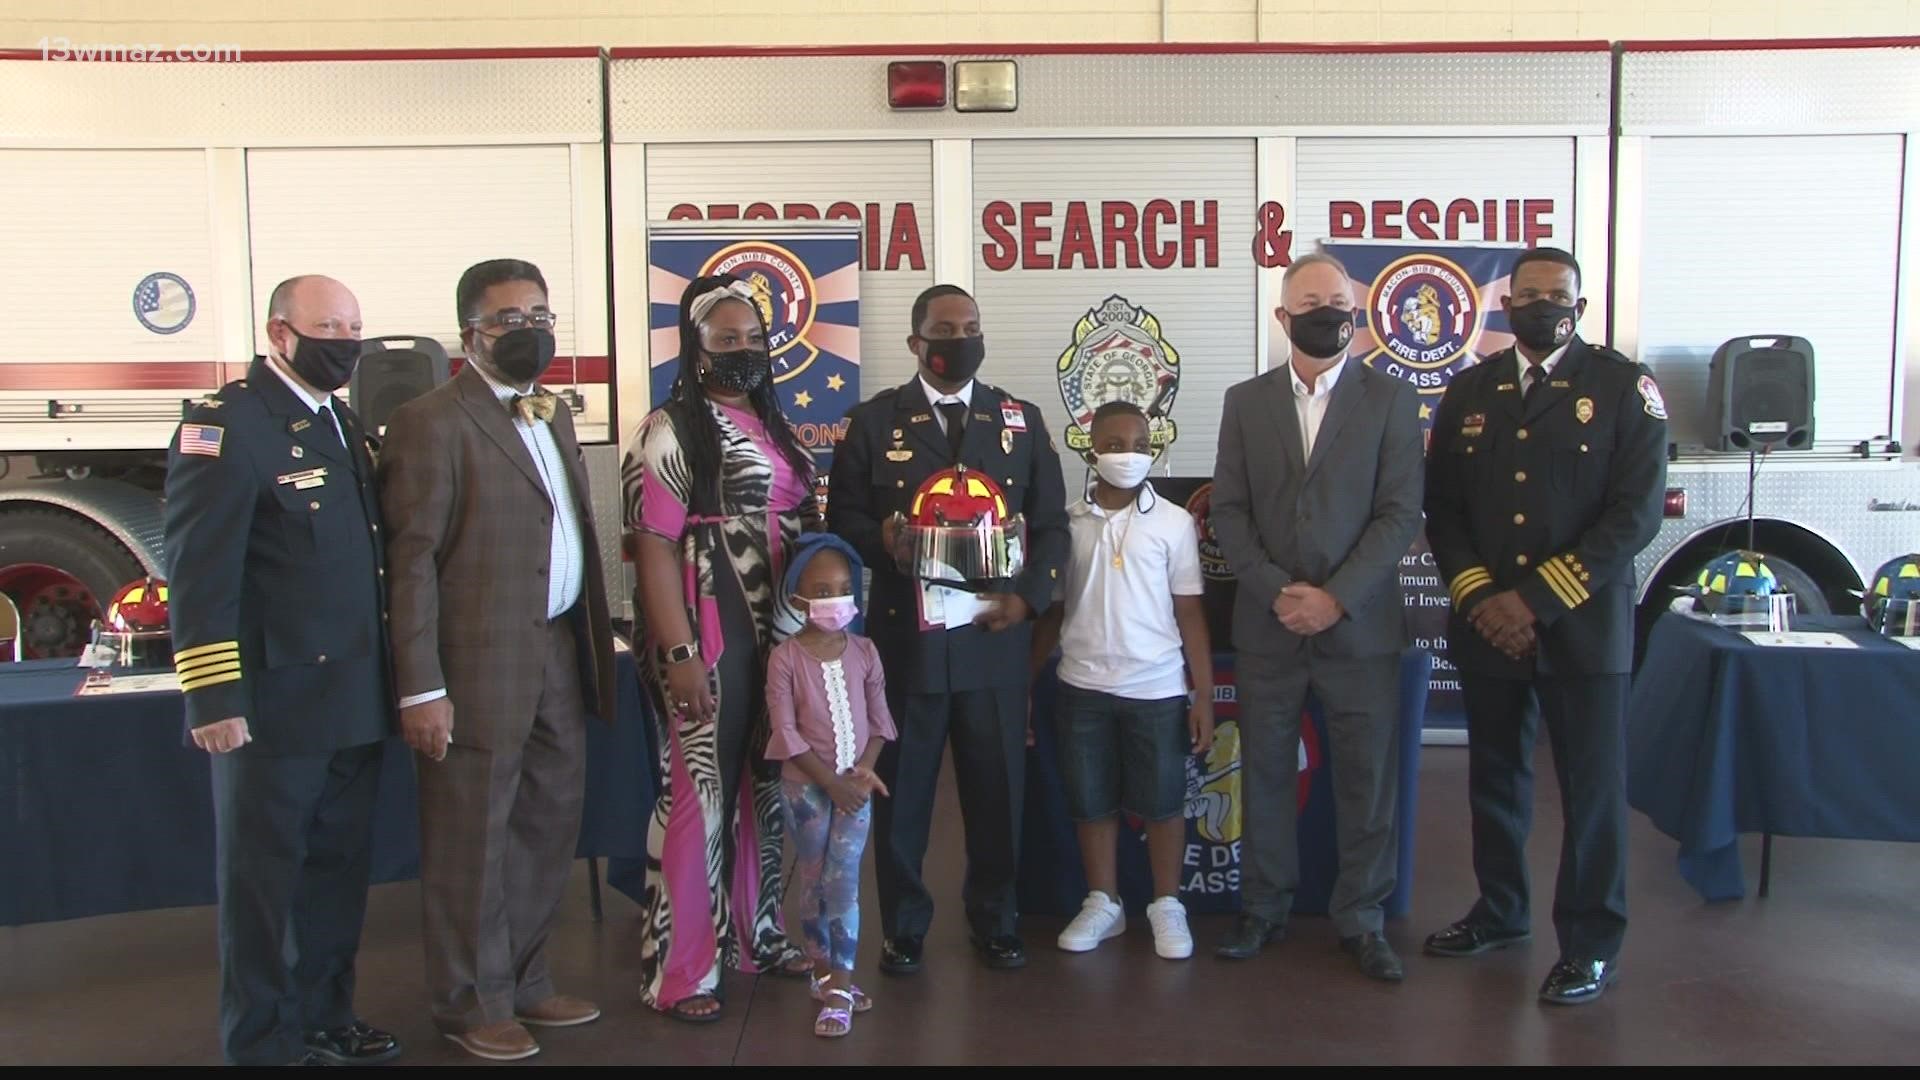 Thursday morning, city leaders, families, and friends gathered at the Macon-Bibb fire station headquarters as 10 firefighters received promotions.